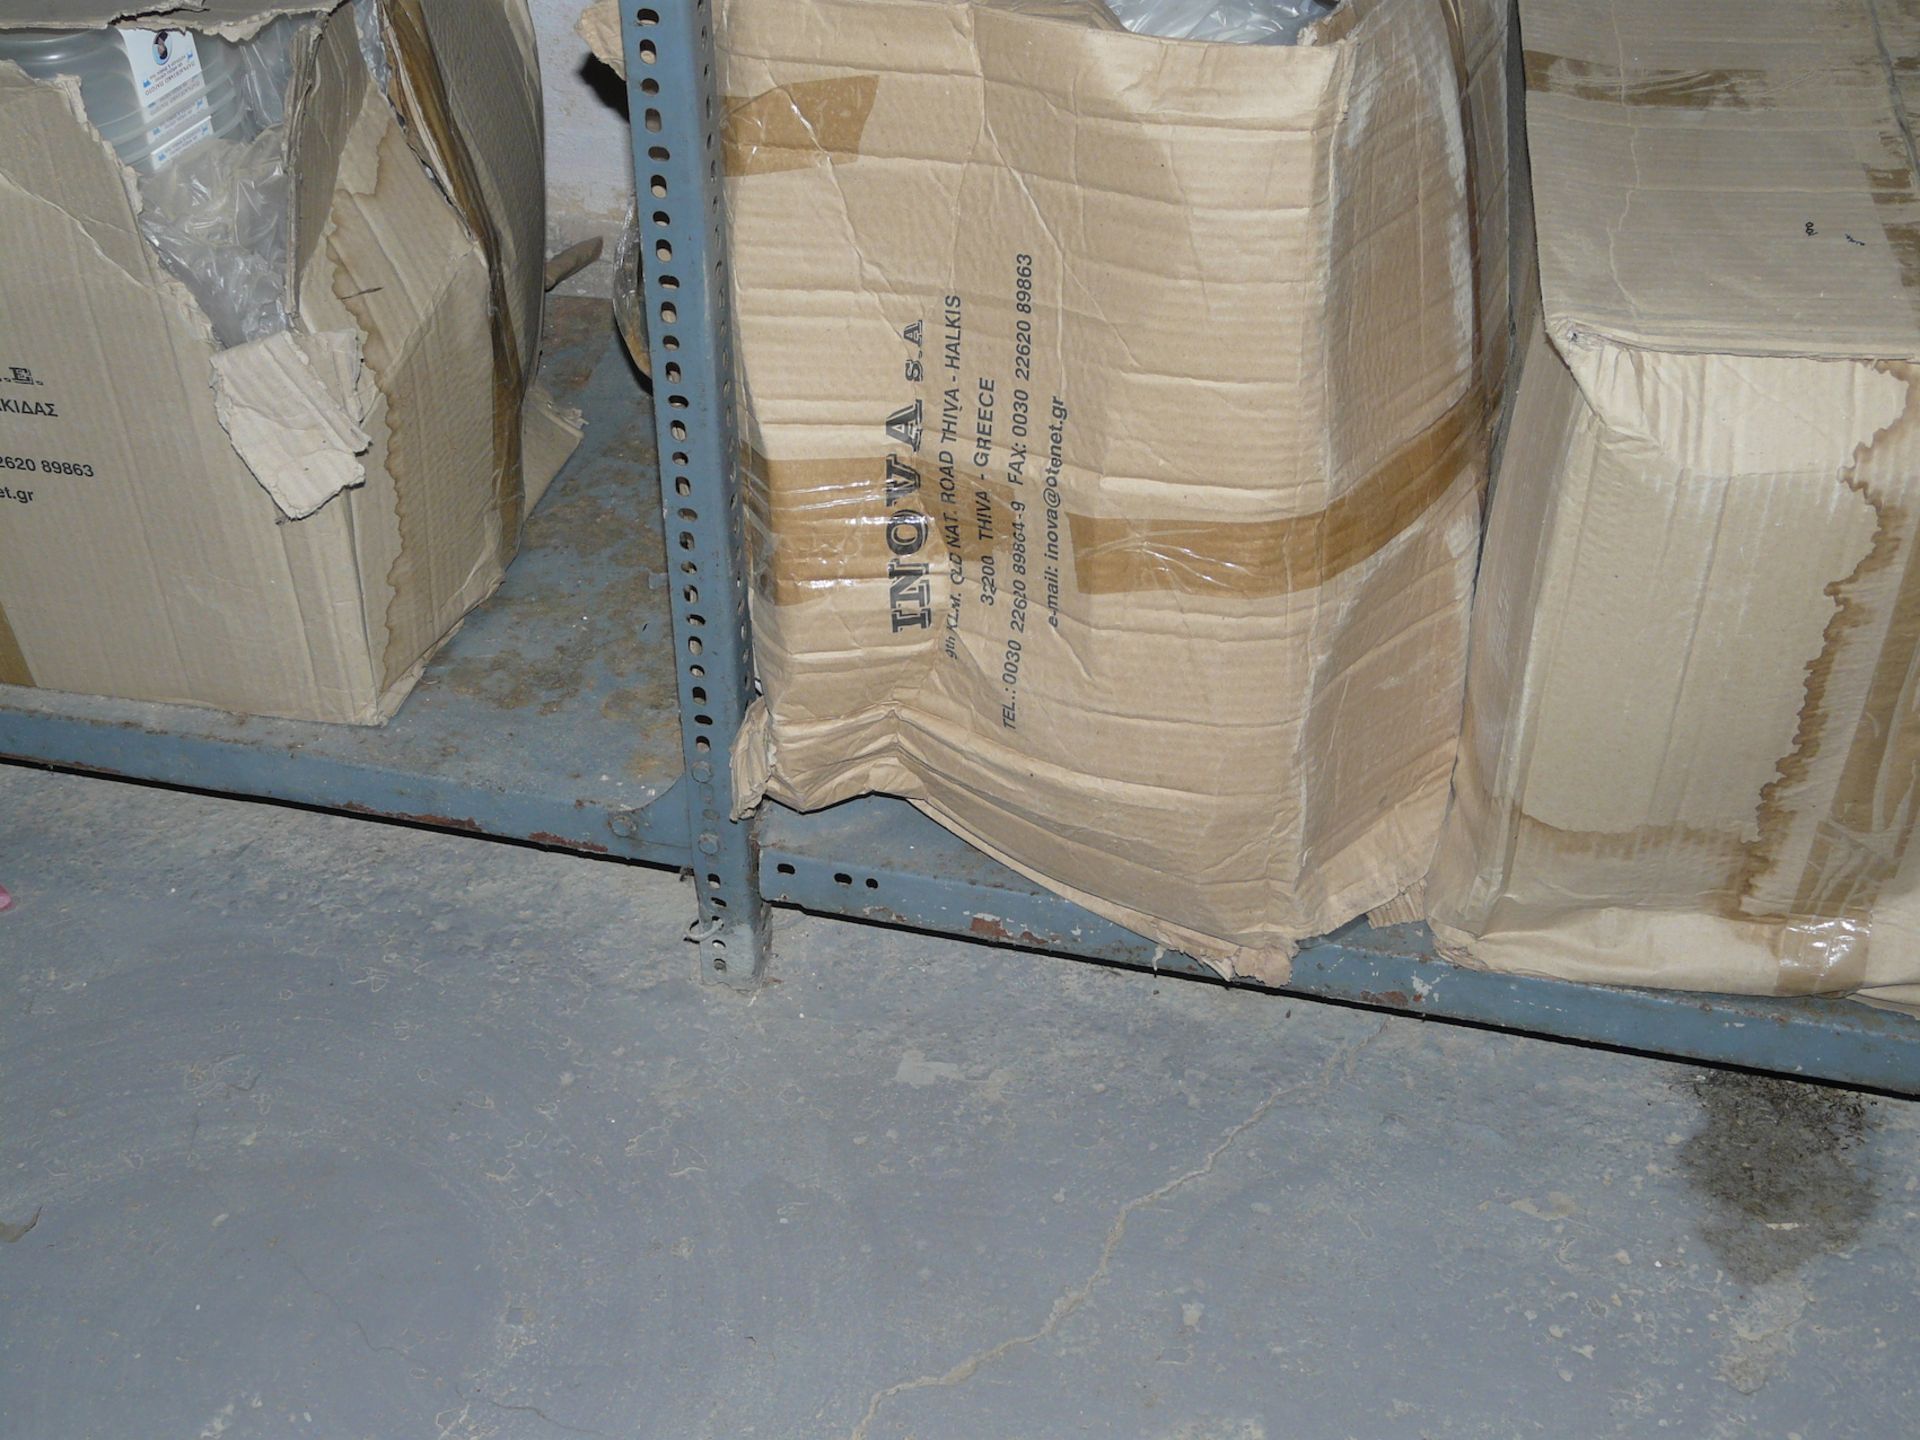 English: Various Pallets with Packaging Material for Ice Cream with Brand Name 10 pieces Greek: - Image 8 of 8